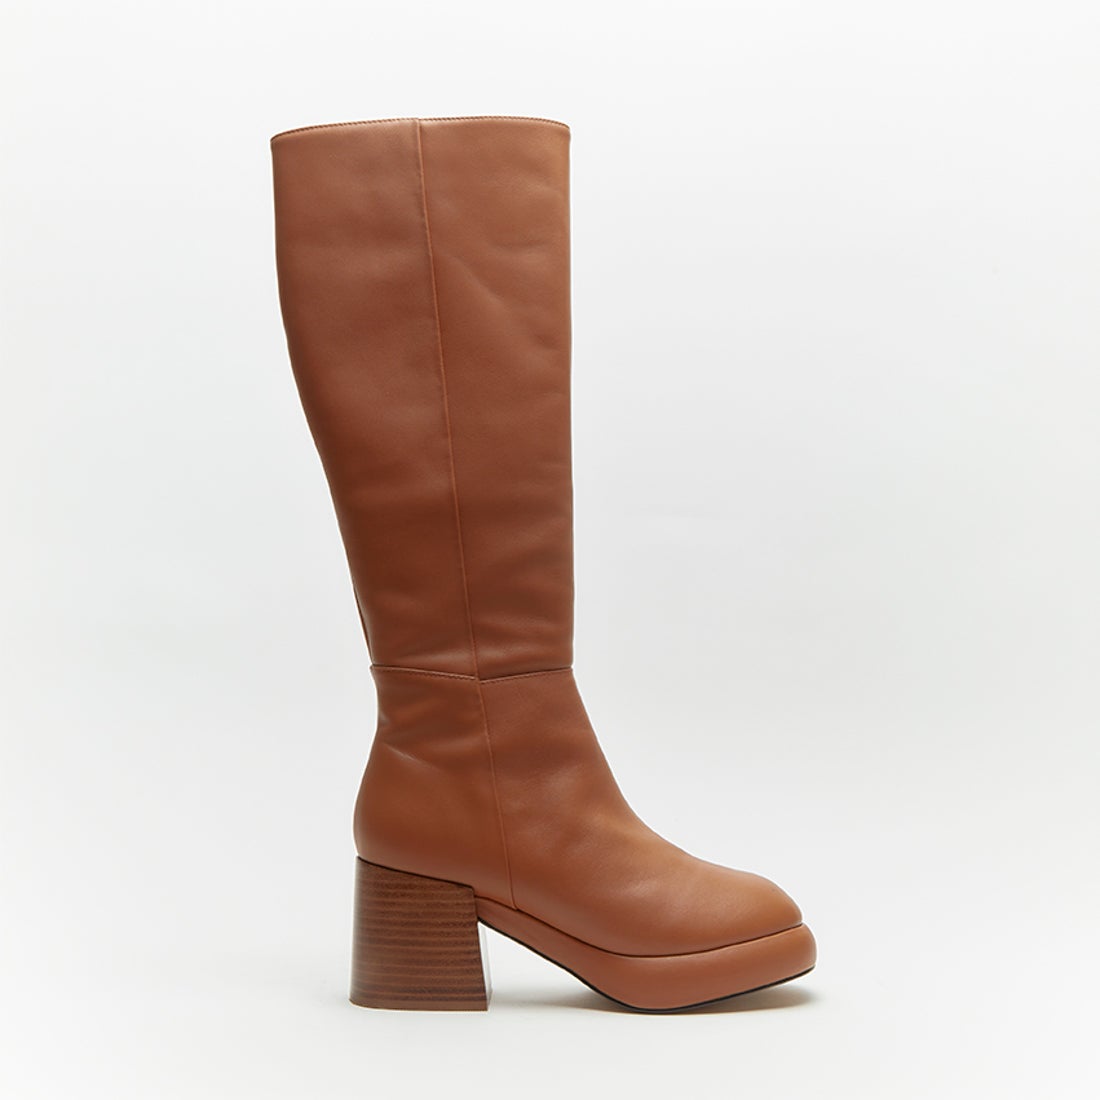 CELLINA LEATHER LONG（CAMEL BROWN）